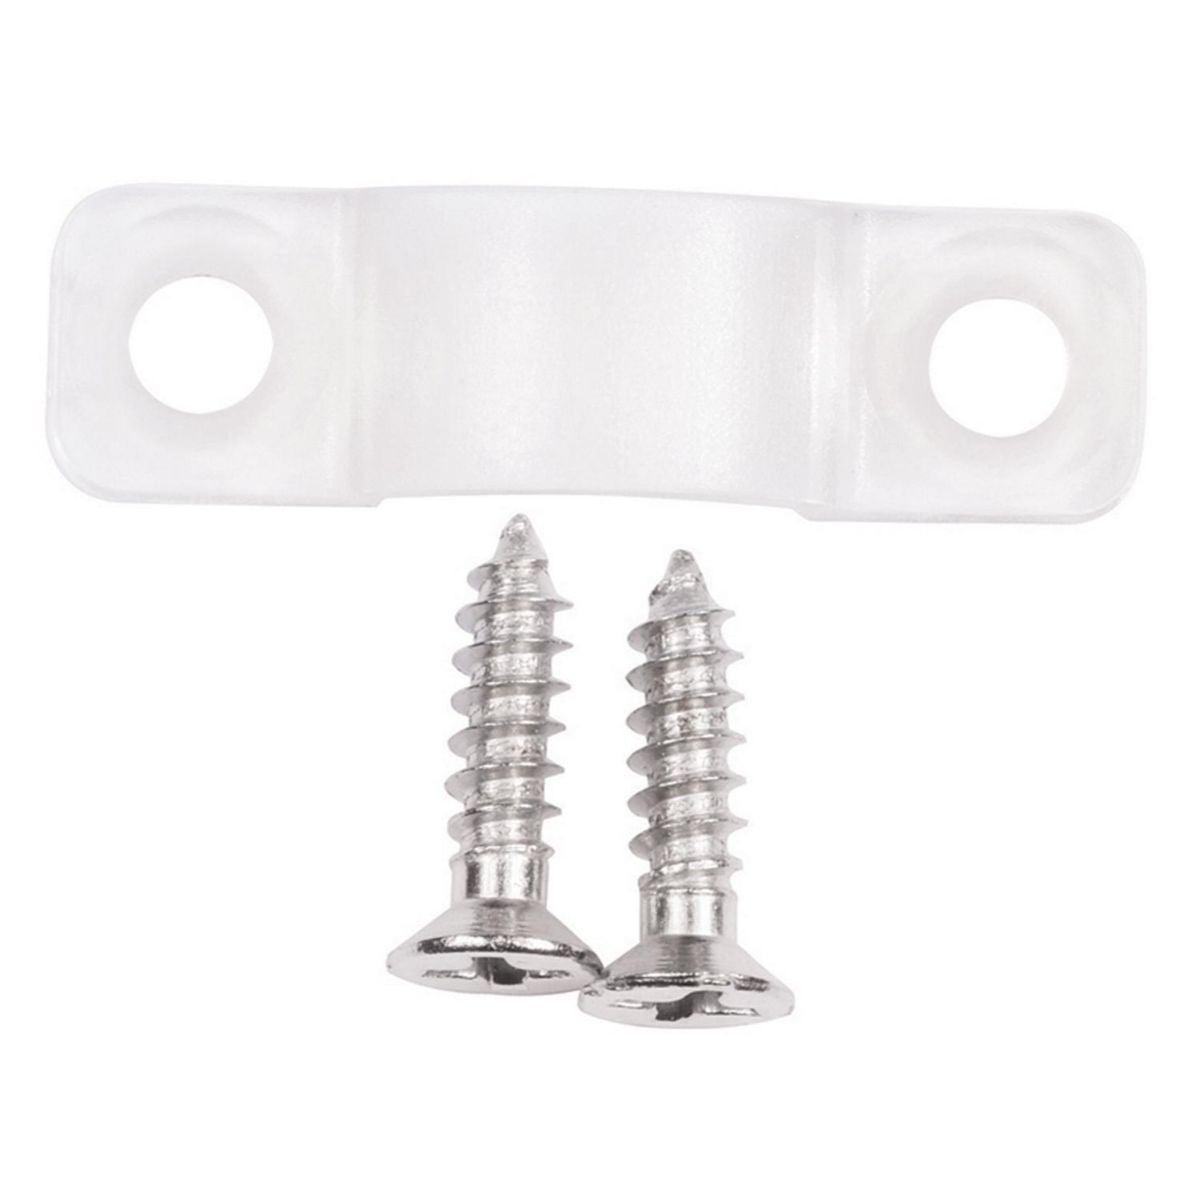 Clear Cord Clip with Screws for Elena Task Lighting, Pack of 4